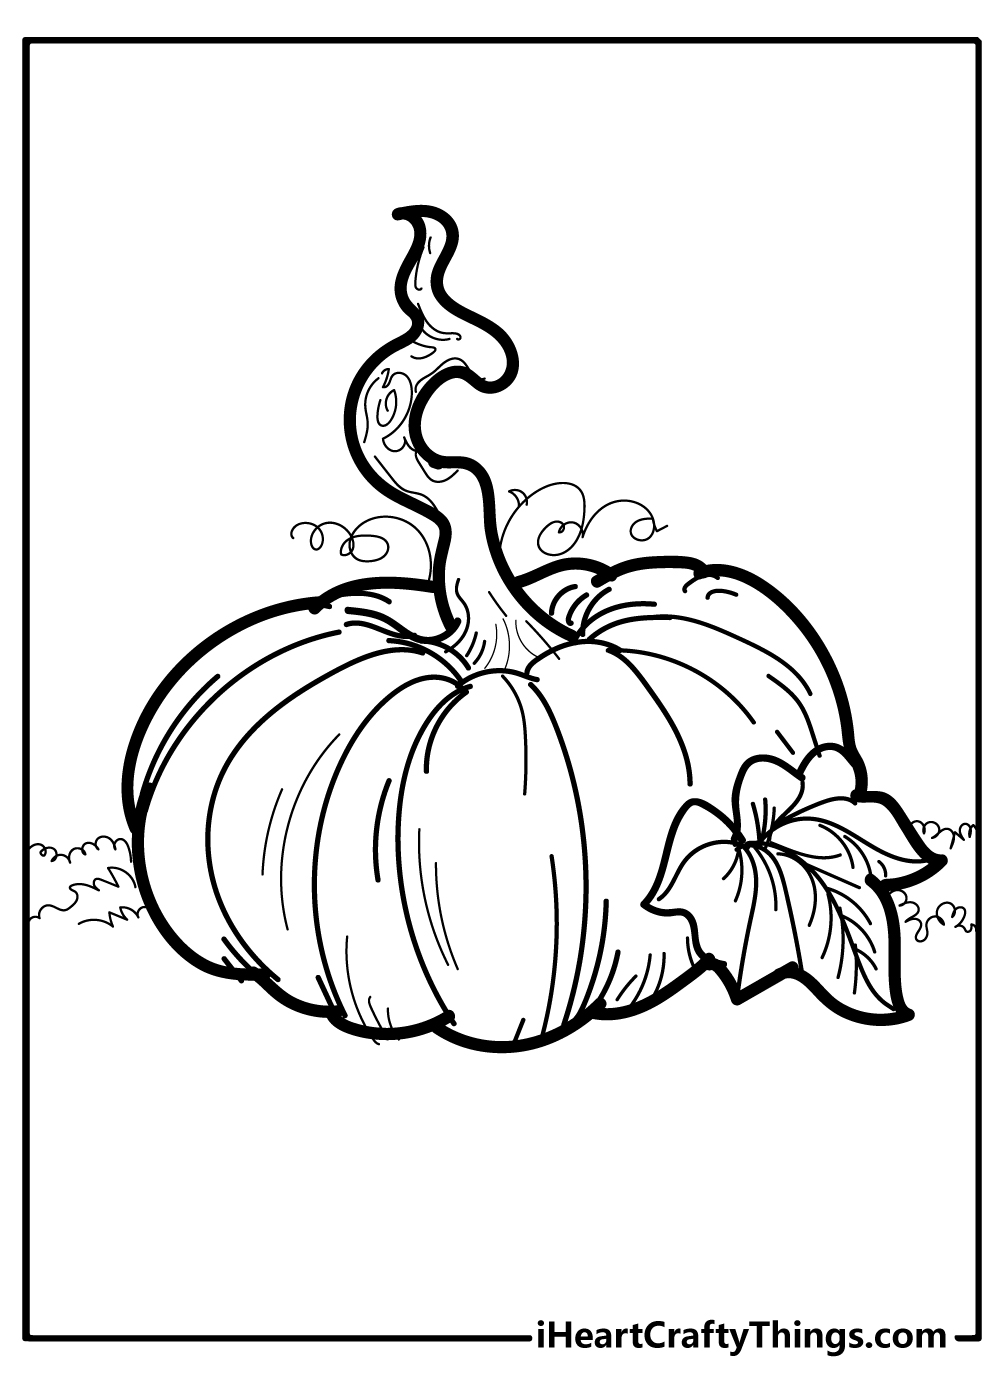 Pumpkin Coloring Sheets free download for kids